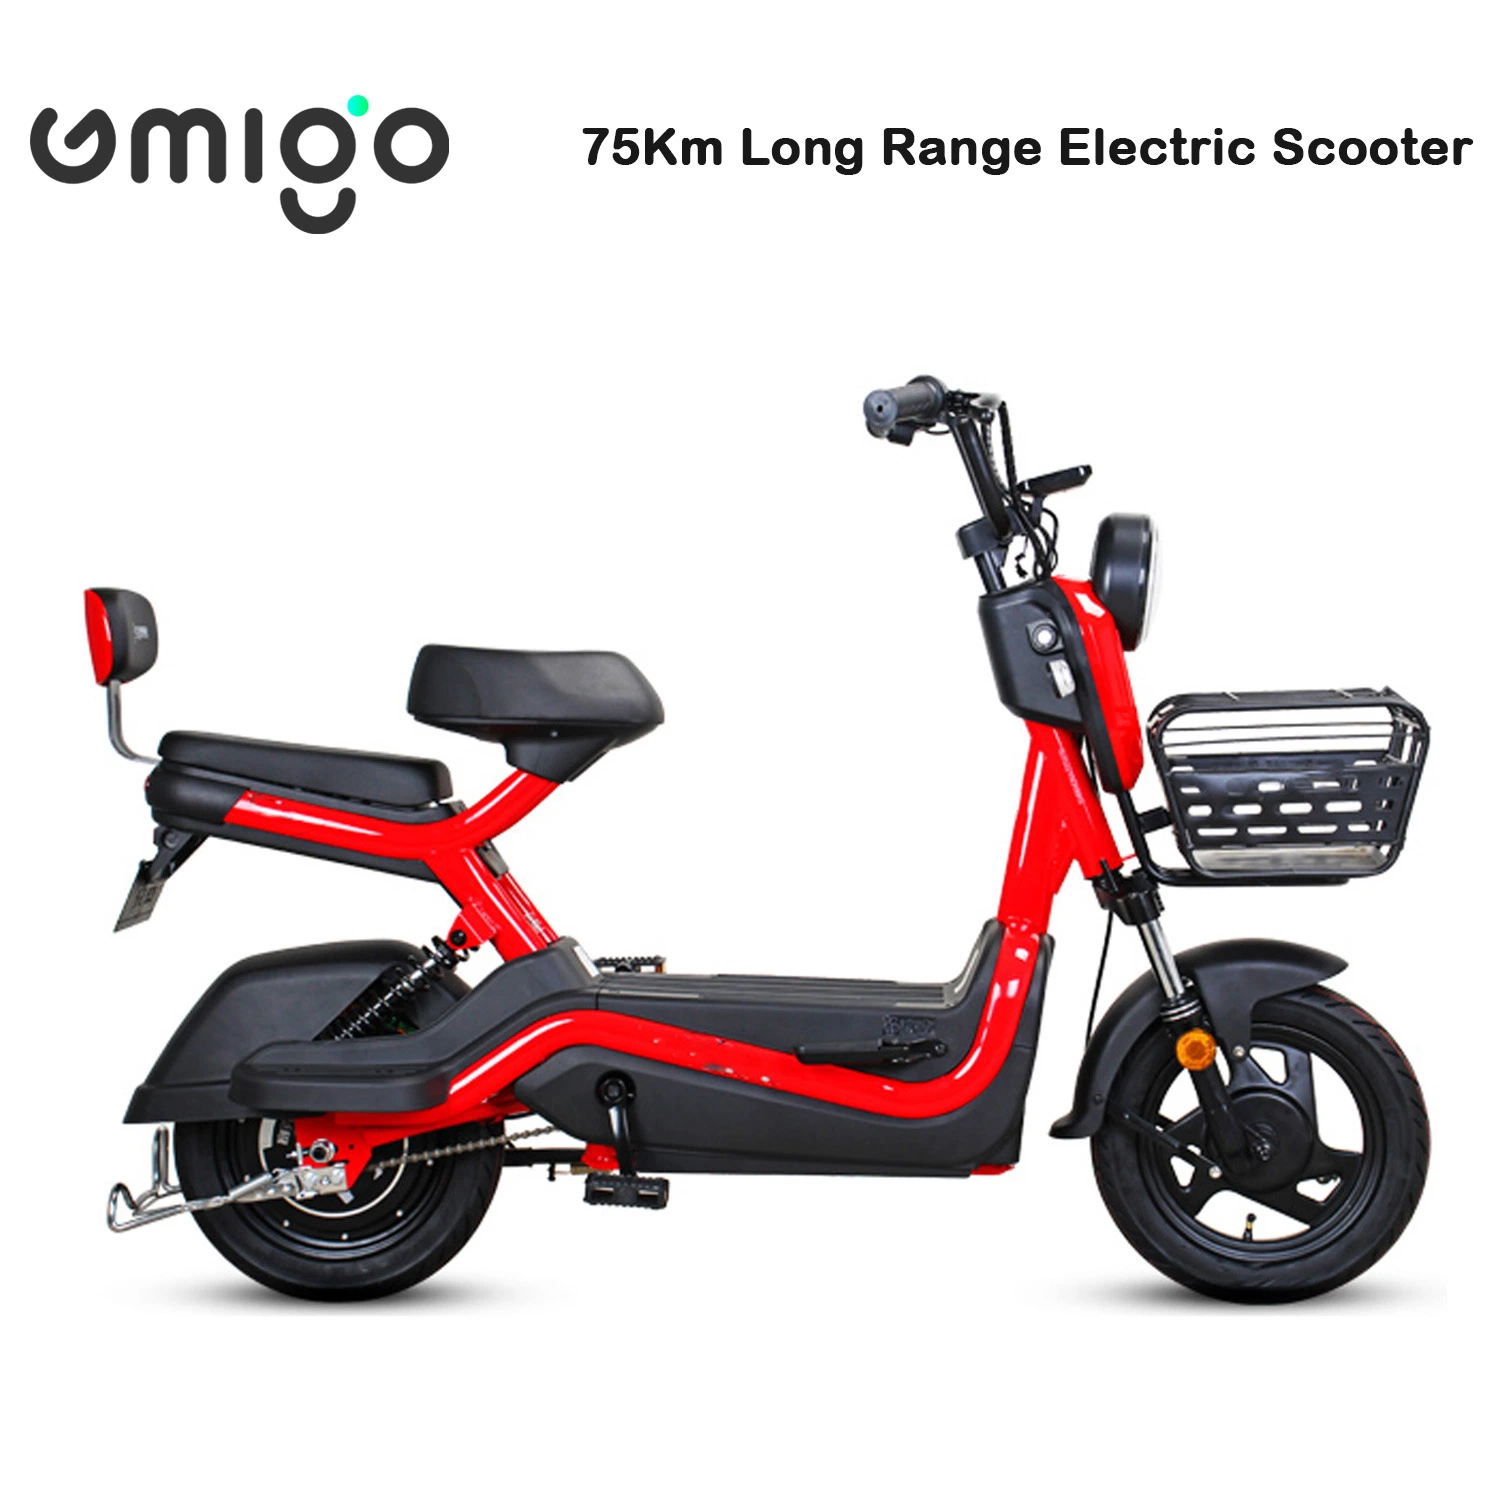 48V/60V 20ah Lithium Battery Small Moped Electric Scooter